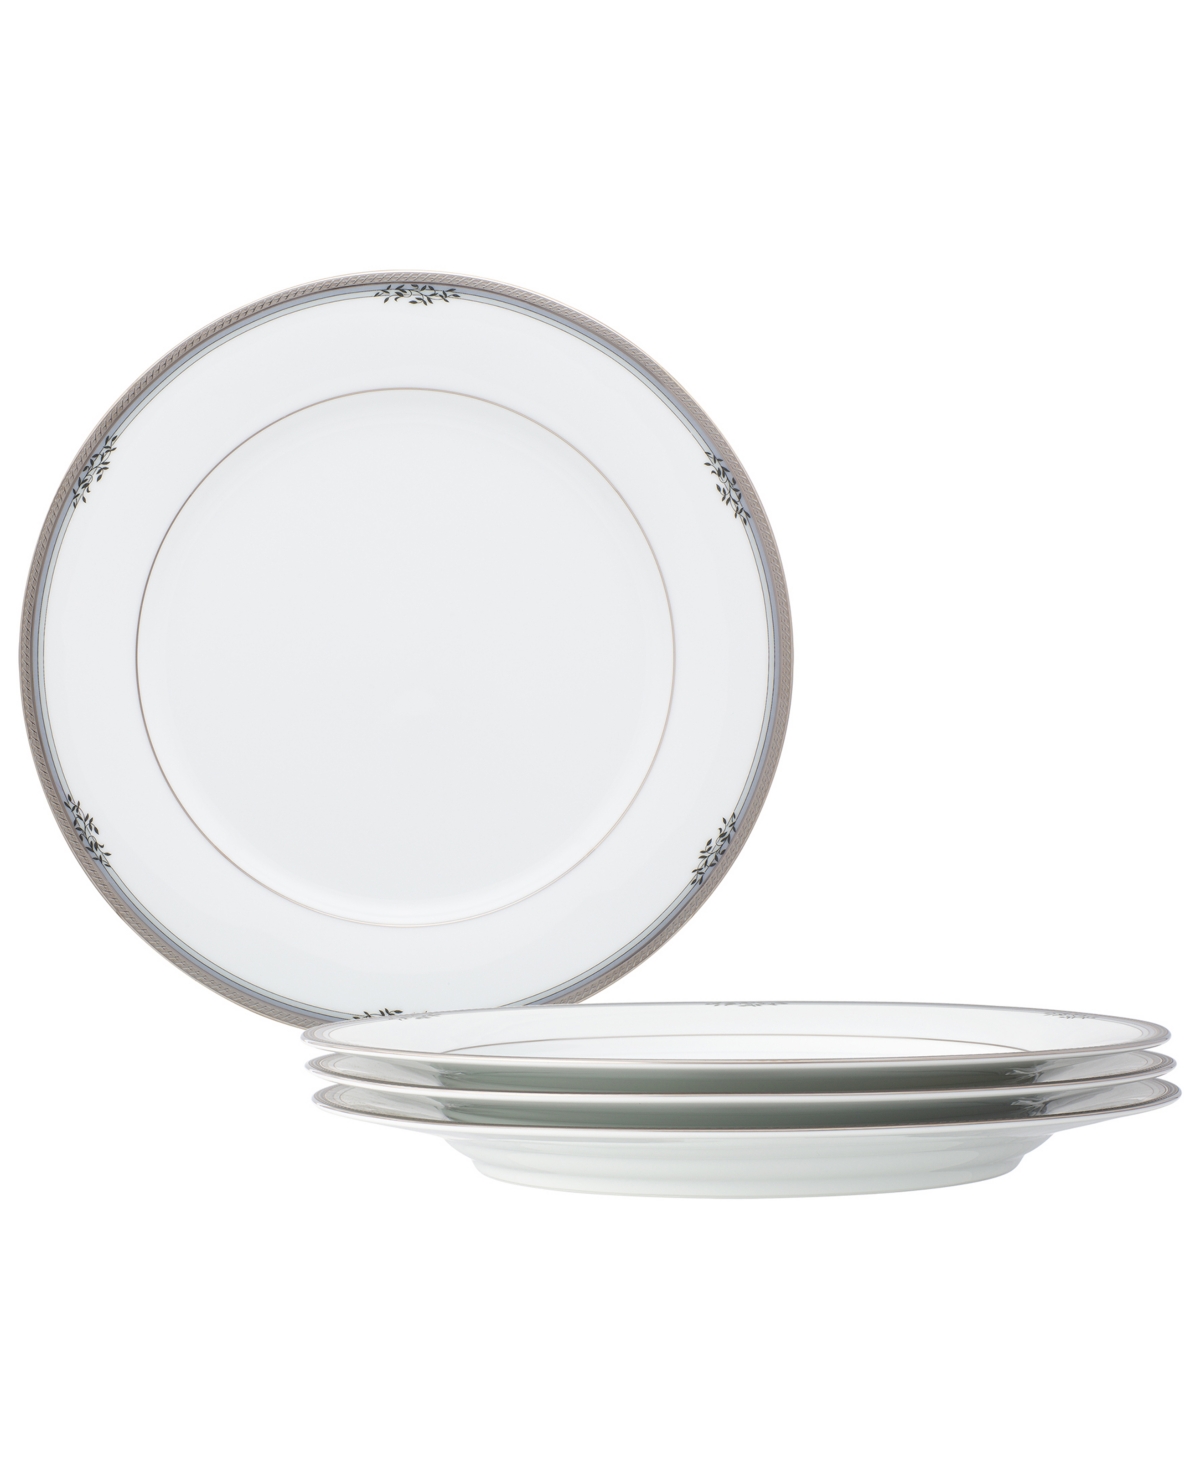 Noritake Laurelvale 4 Piece Dinner Plate Set, Service For 4 In White